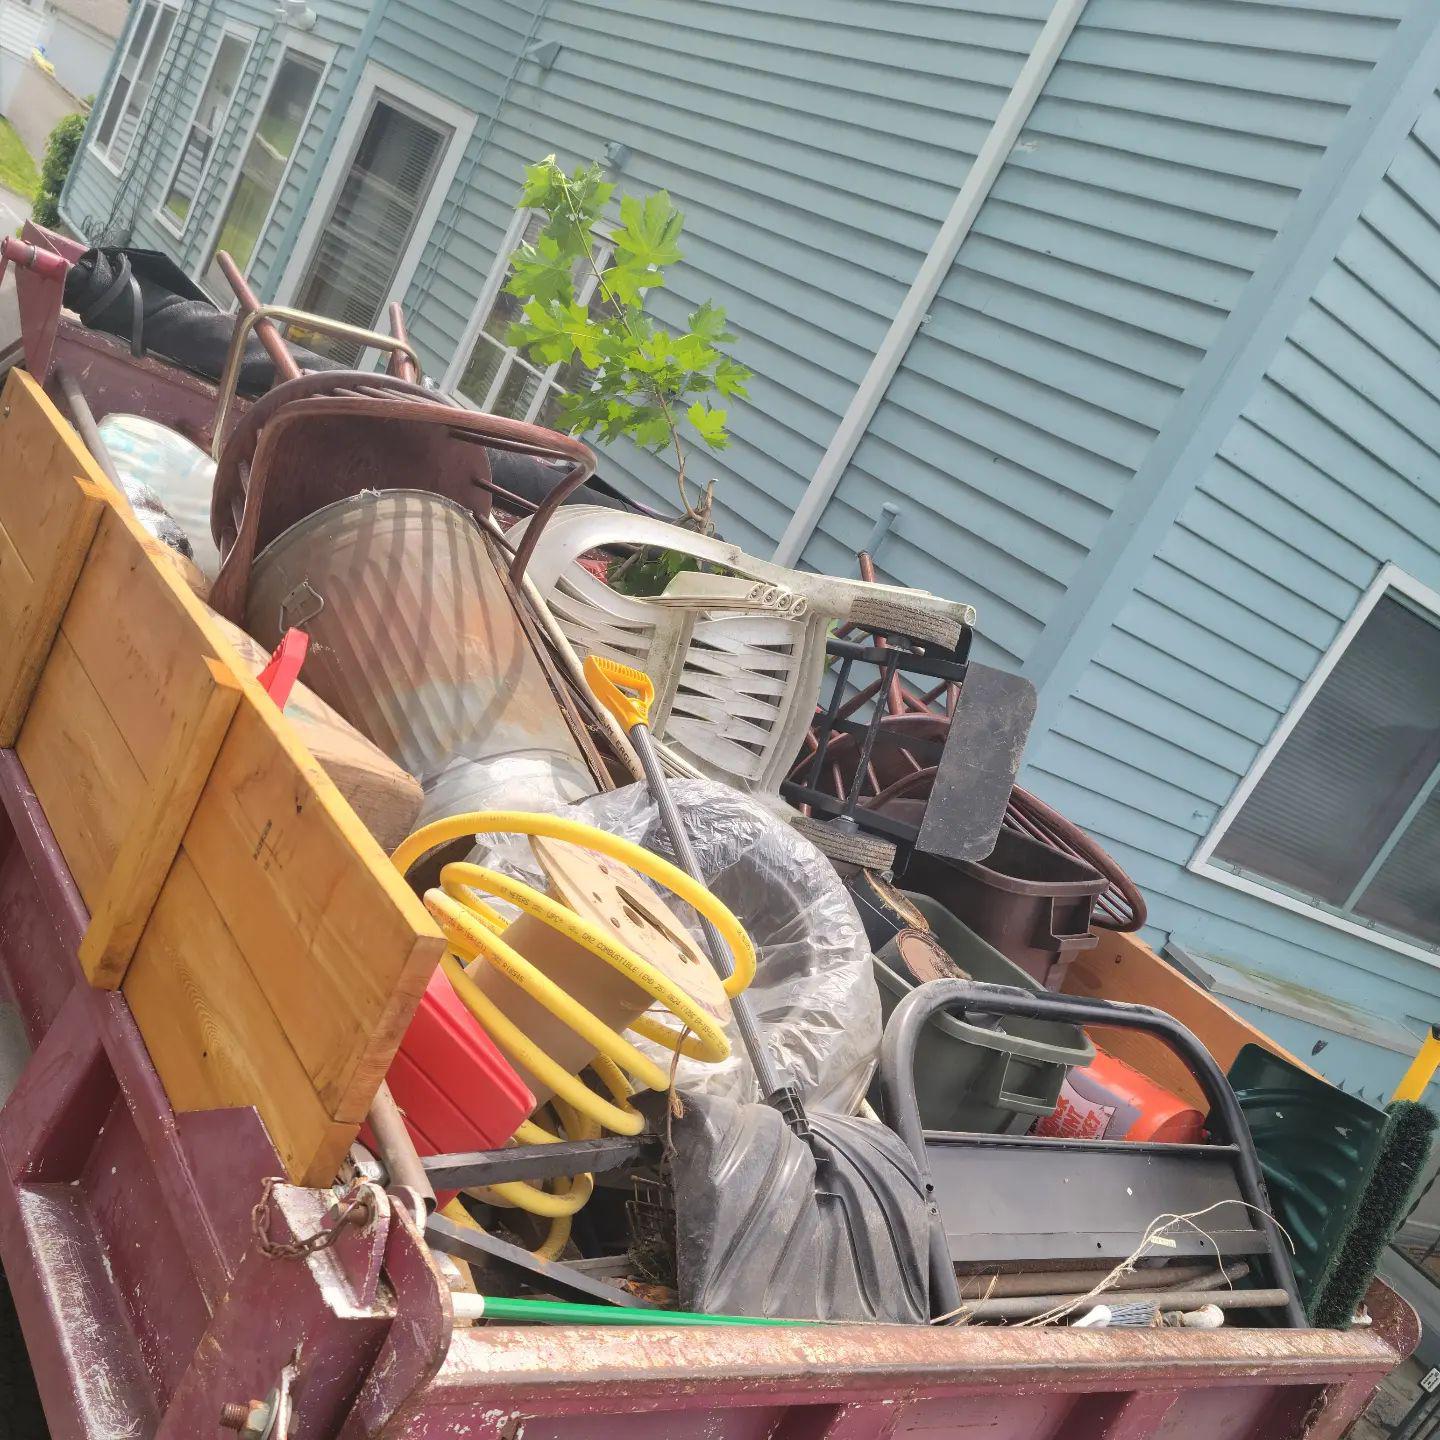 Junk removal made easy! Contact us today!